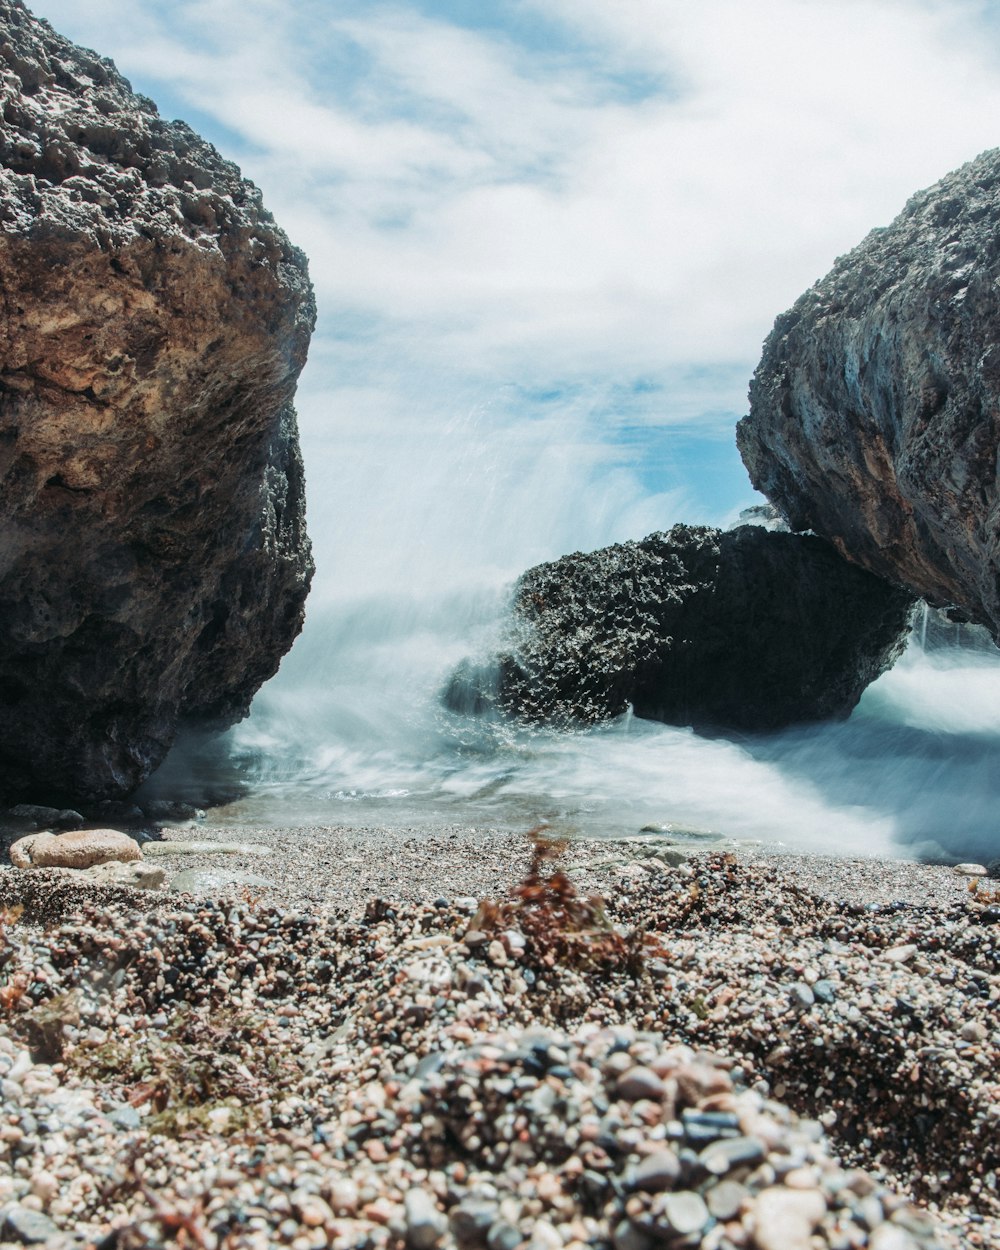 a rocky beach with waves crashing against the shore